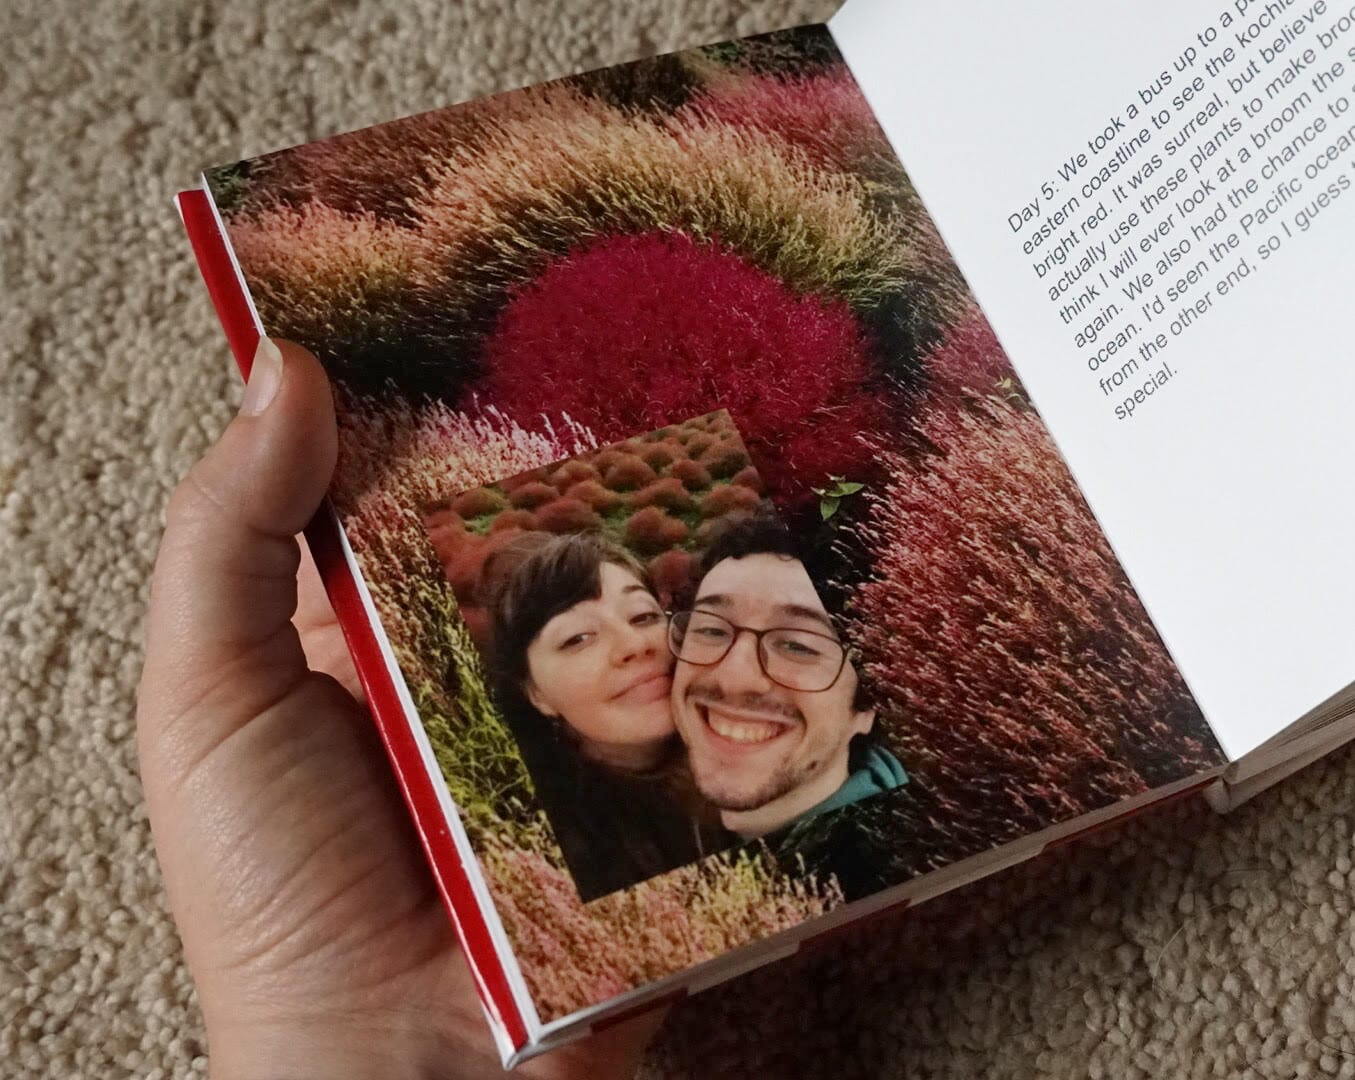 An In-Depth Review of the Printique Photo Book: Is This Product Worth It?